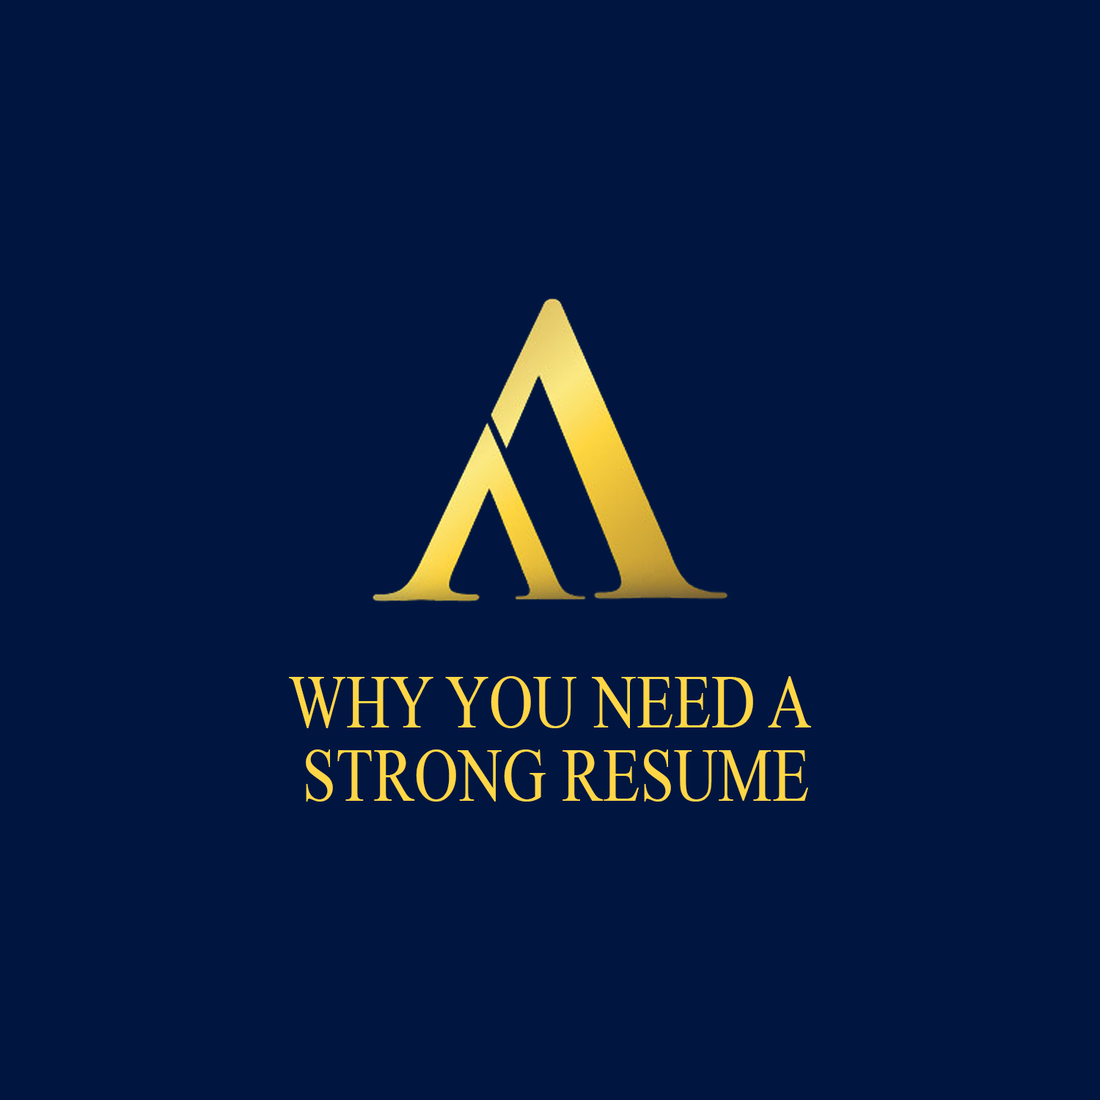 Why You Need a Strong Resume